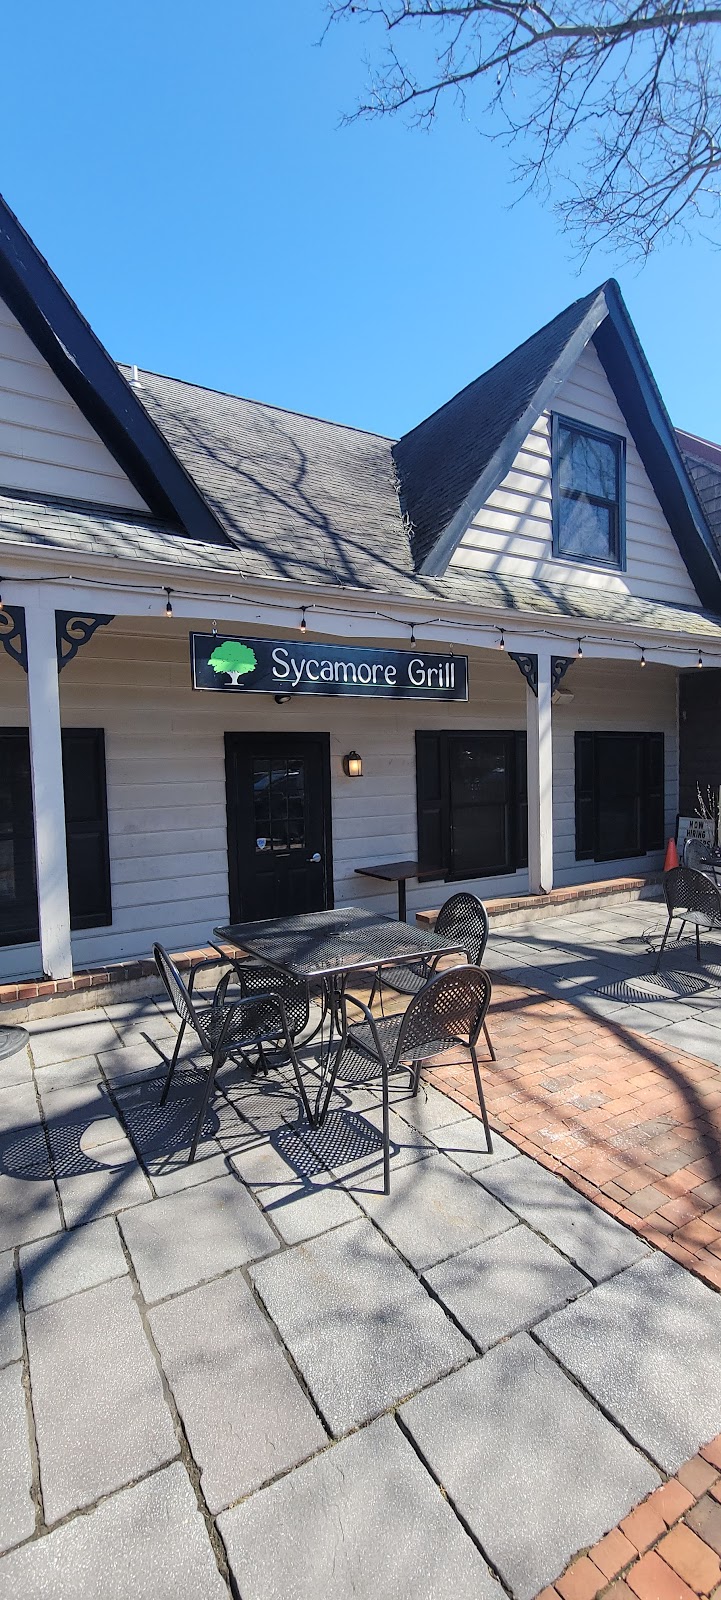 Sycamore Grill | 255 N Sycamore St, Newtown, PA 18940 | Phone: (215) 968-6326